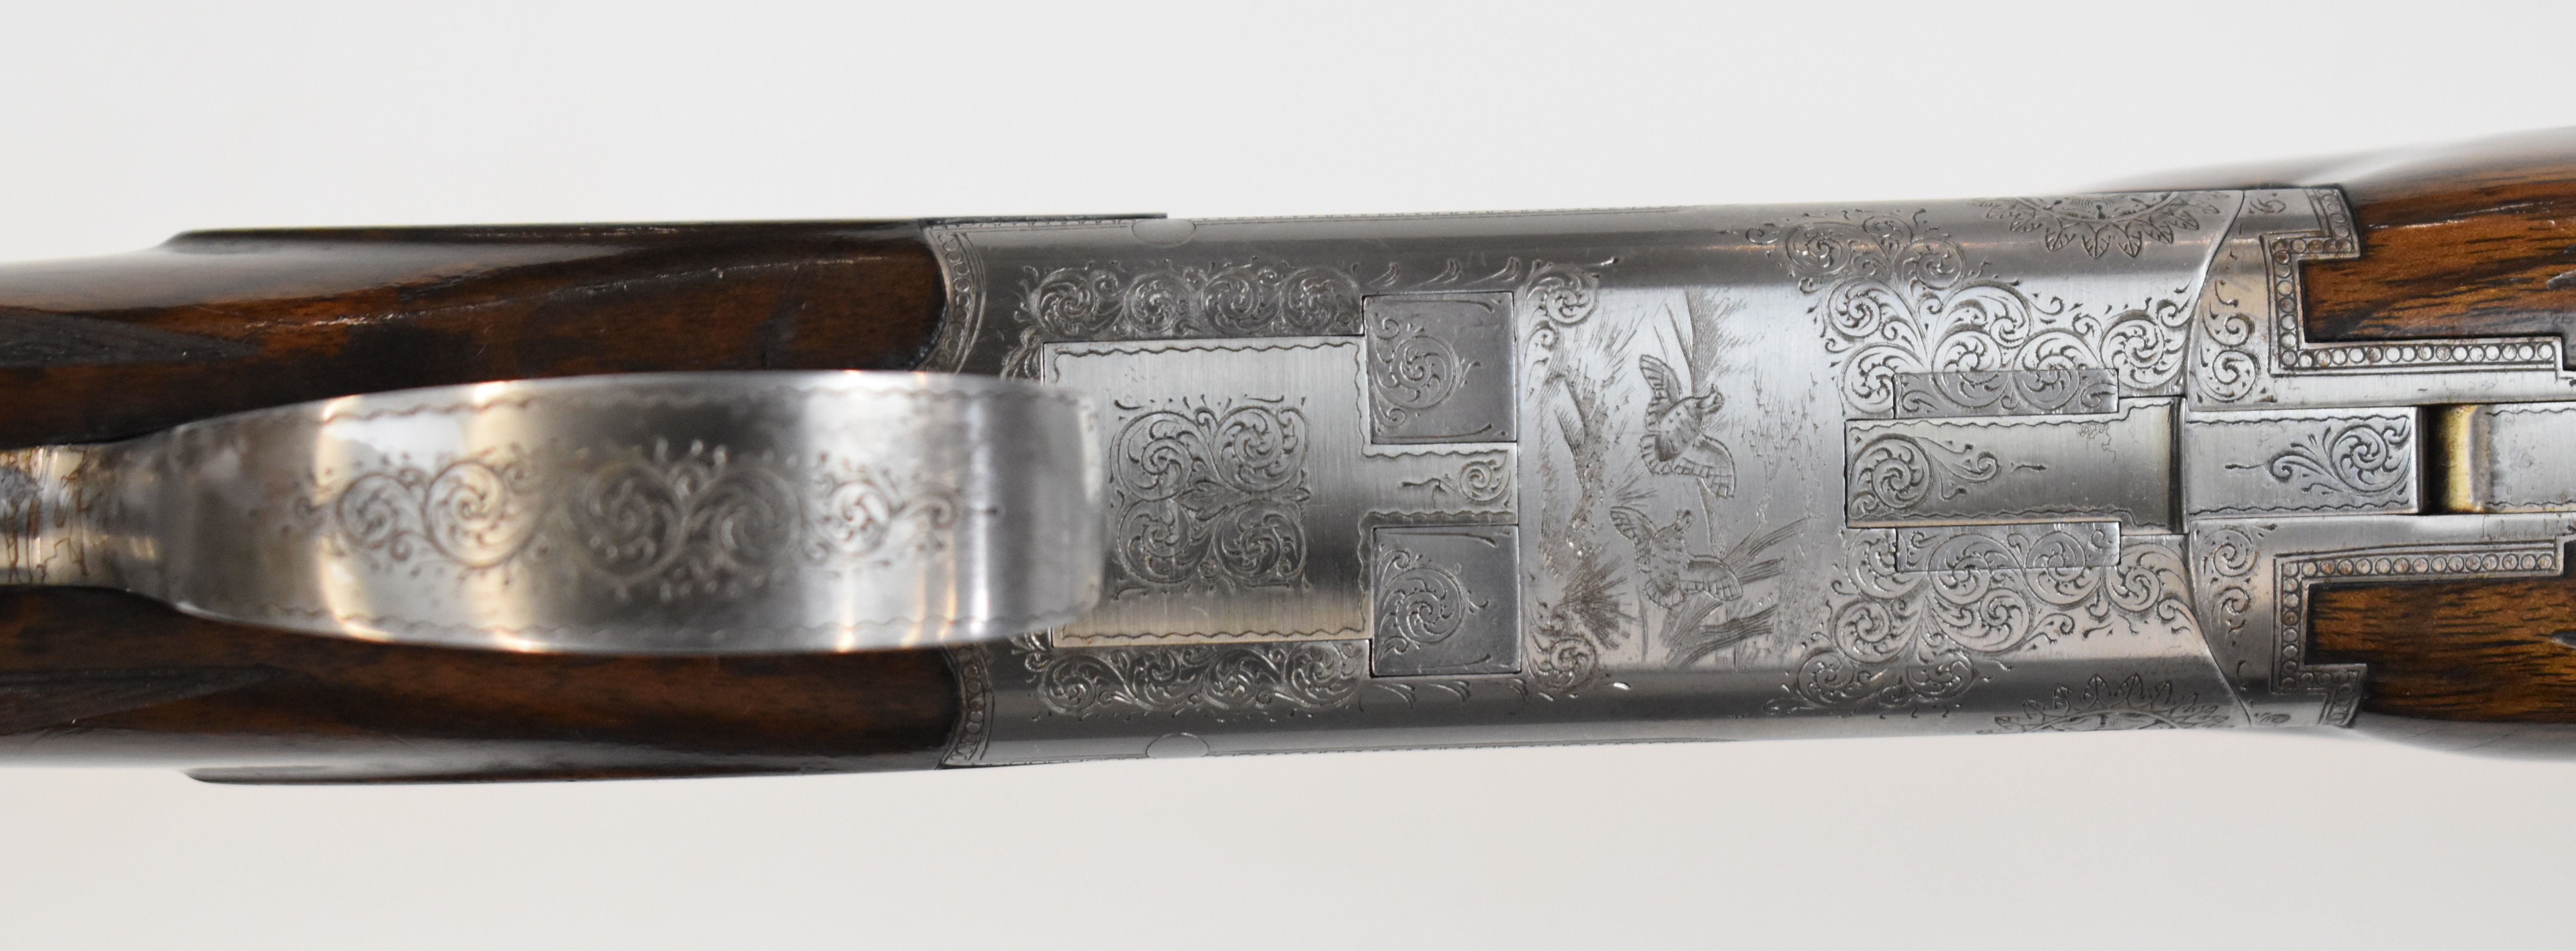 Browning B2 12 bore over and under shotgun with engraved scenes of birds to the locks and underside, - Image 7 of 12